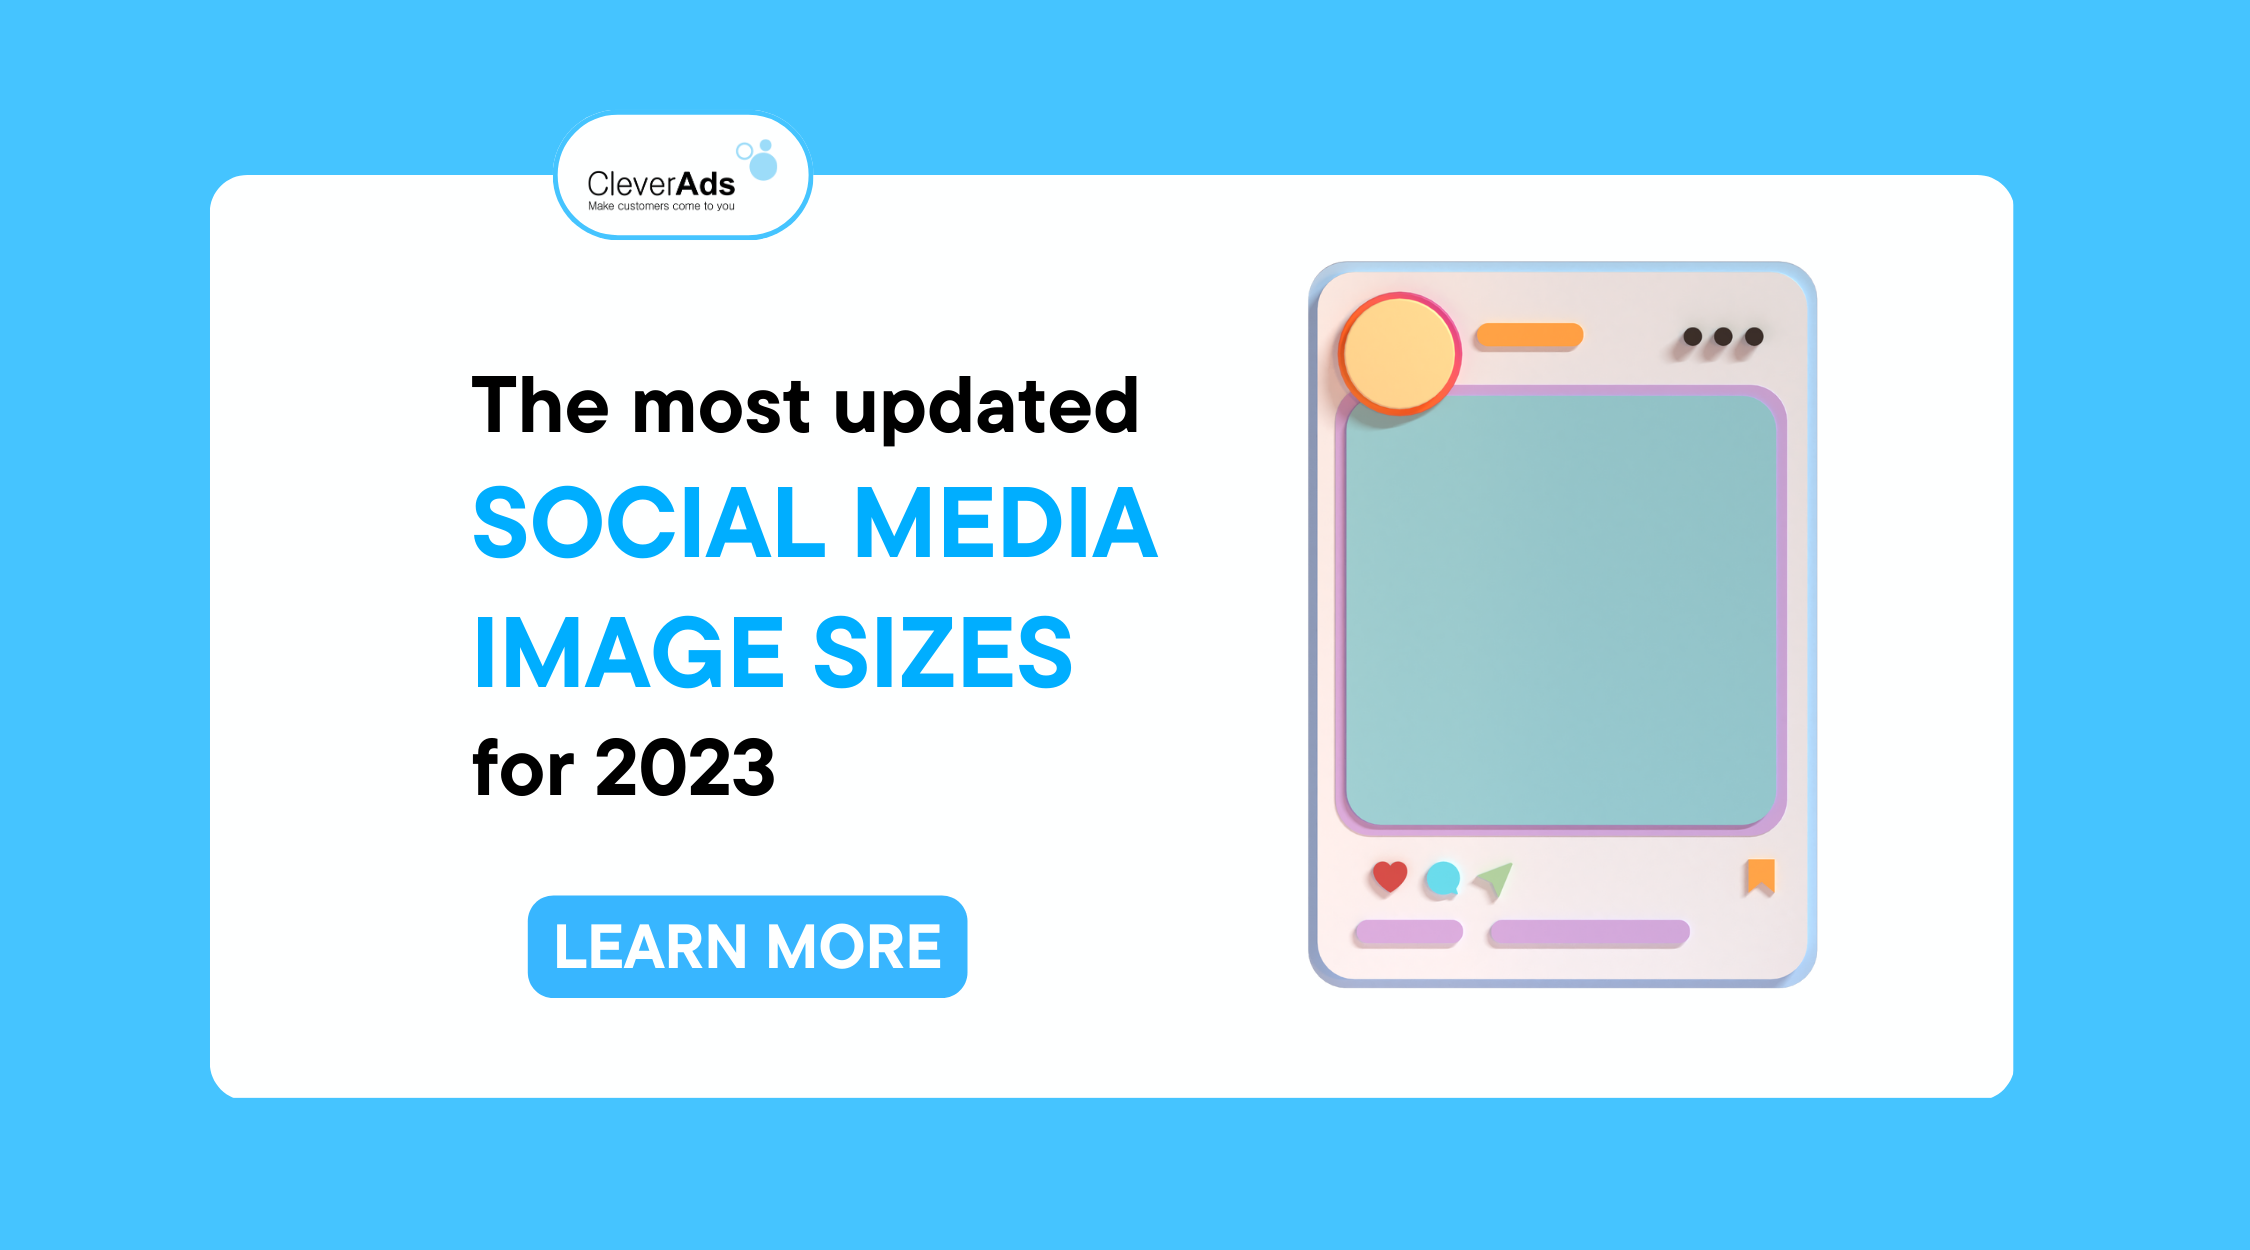 The most updated social media image sizes for 2023